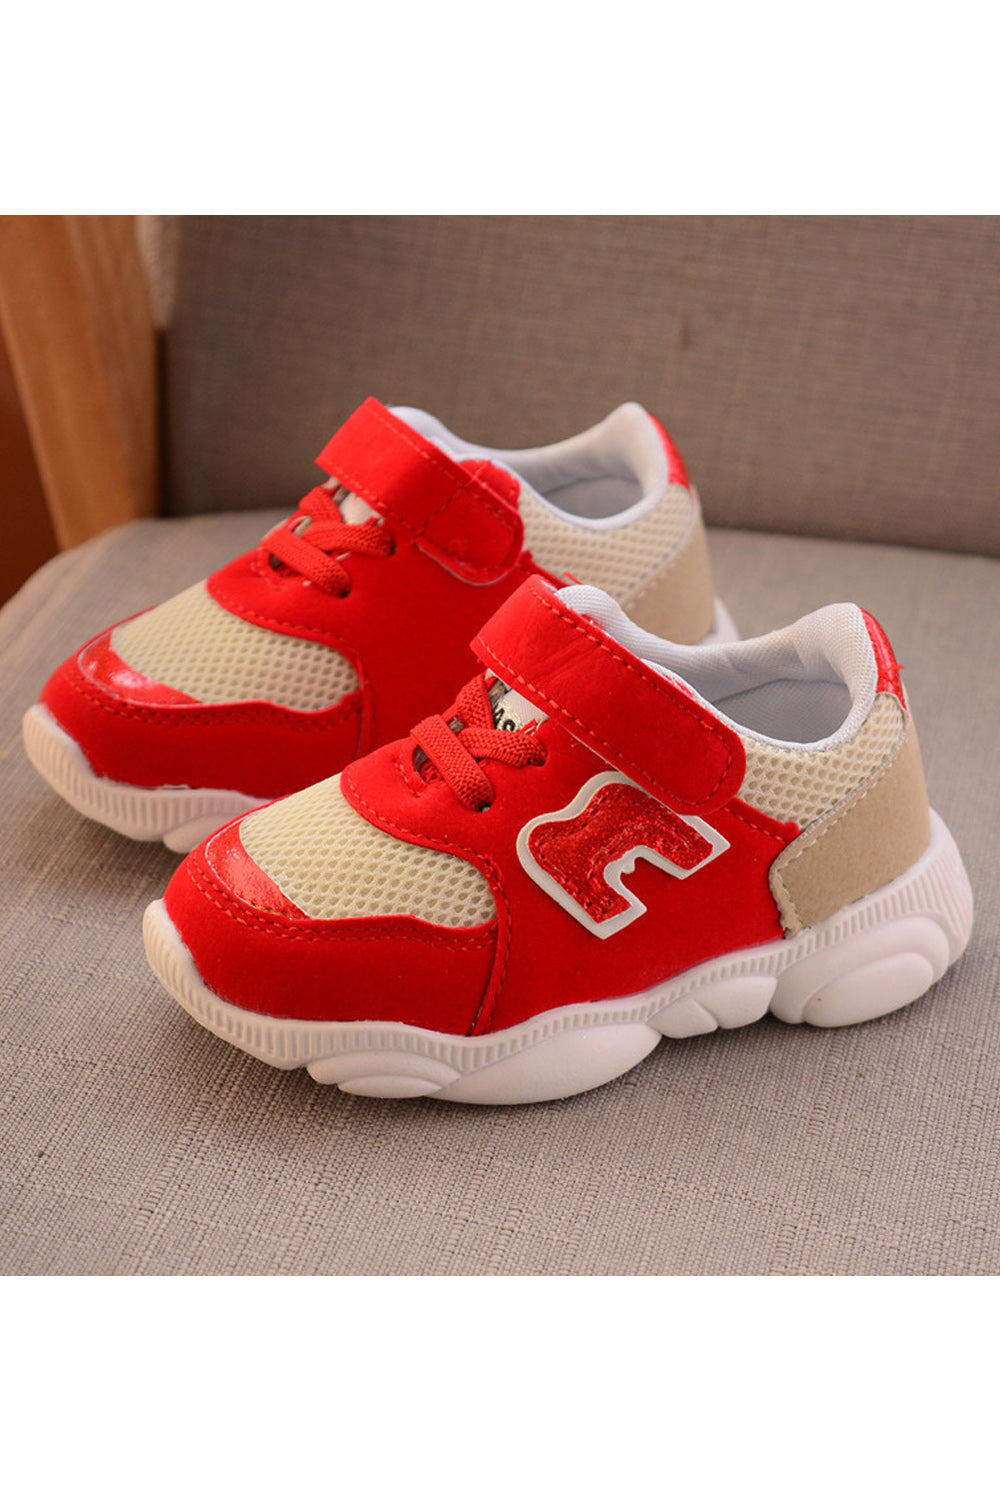 Toddler Girls Elegant Styled Solid Colored Rubber Surface Comfy Shoes